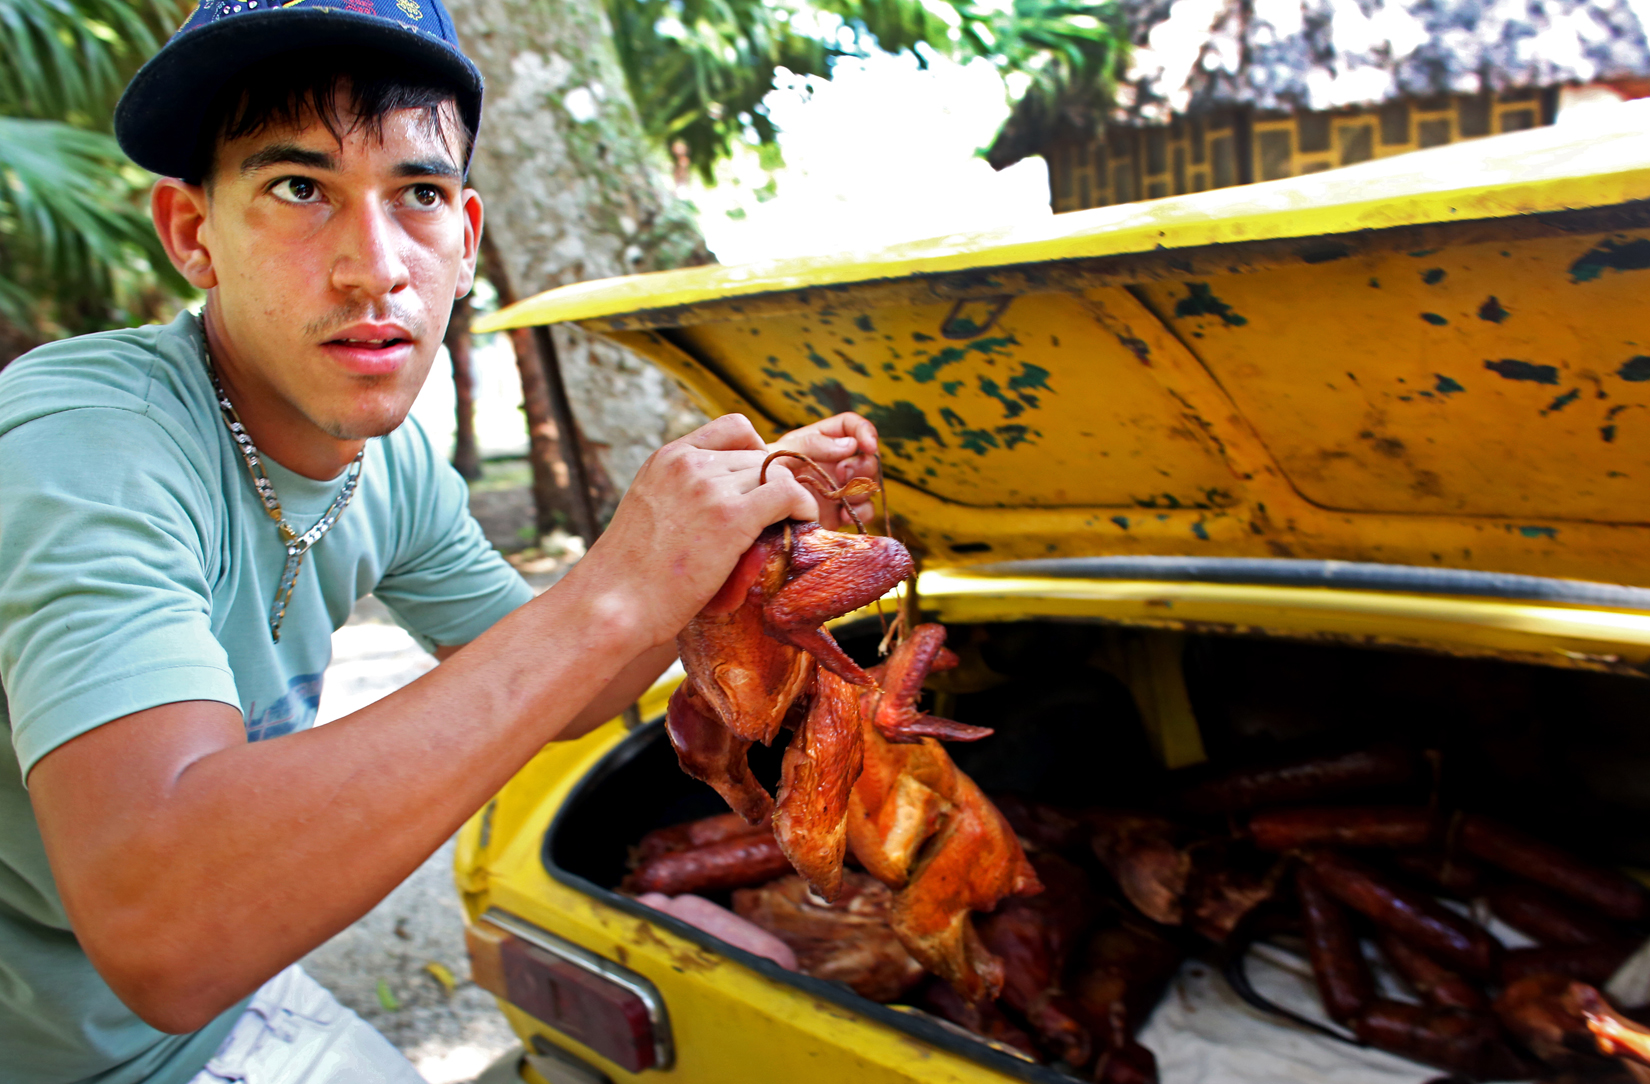 A man prepares whole grilled chicken for sale transported in the trunk of his Moskvitch, an automobile made by Russia from 1946 to 2002, before a cock-fighting event at a sports arena on April 18, 2015 in Managua, Cuba. Cock-fighting in Cuba is in the gray area of legal - state-run events such as this (non-private) functions are permitted, but not monetary betting. This is in part due to lingering bitterness over the control U.S. mafia used to exercise over casinos and prostitution in pre-revolutionary Cuba, the income from which allowed crime lords a certain level of interference in the country's political matters. 